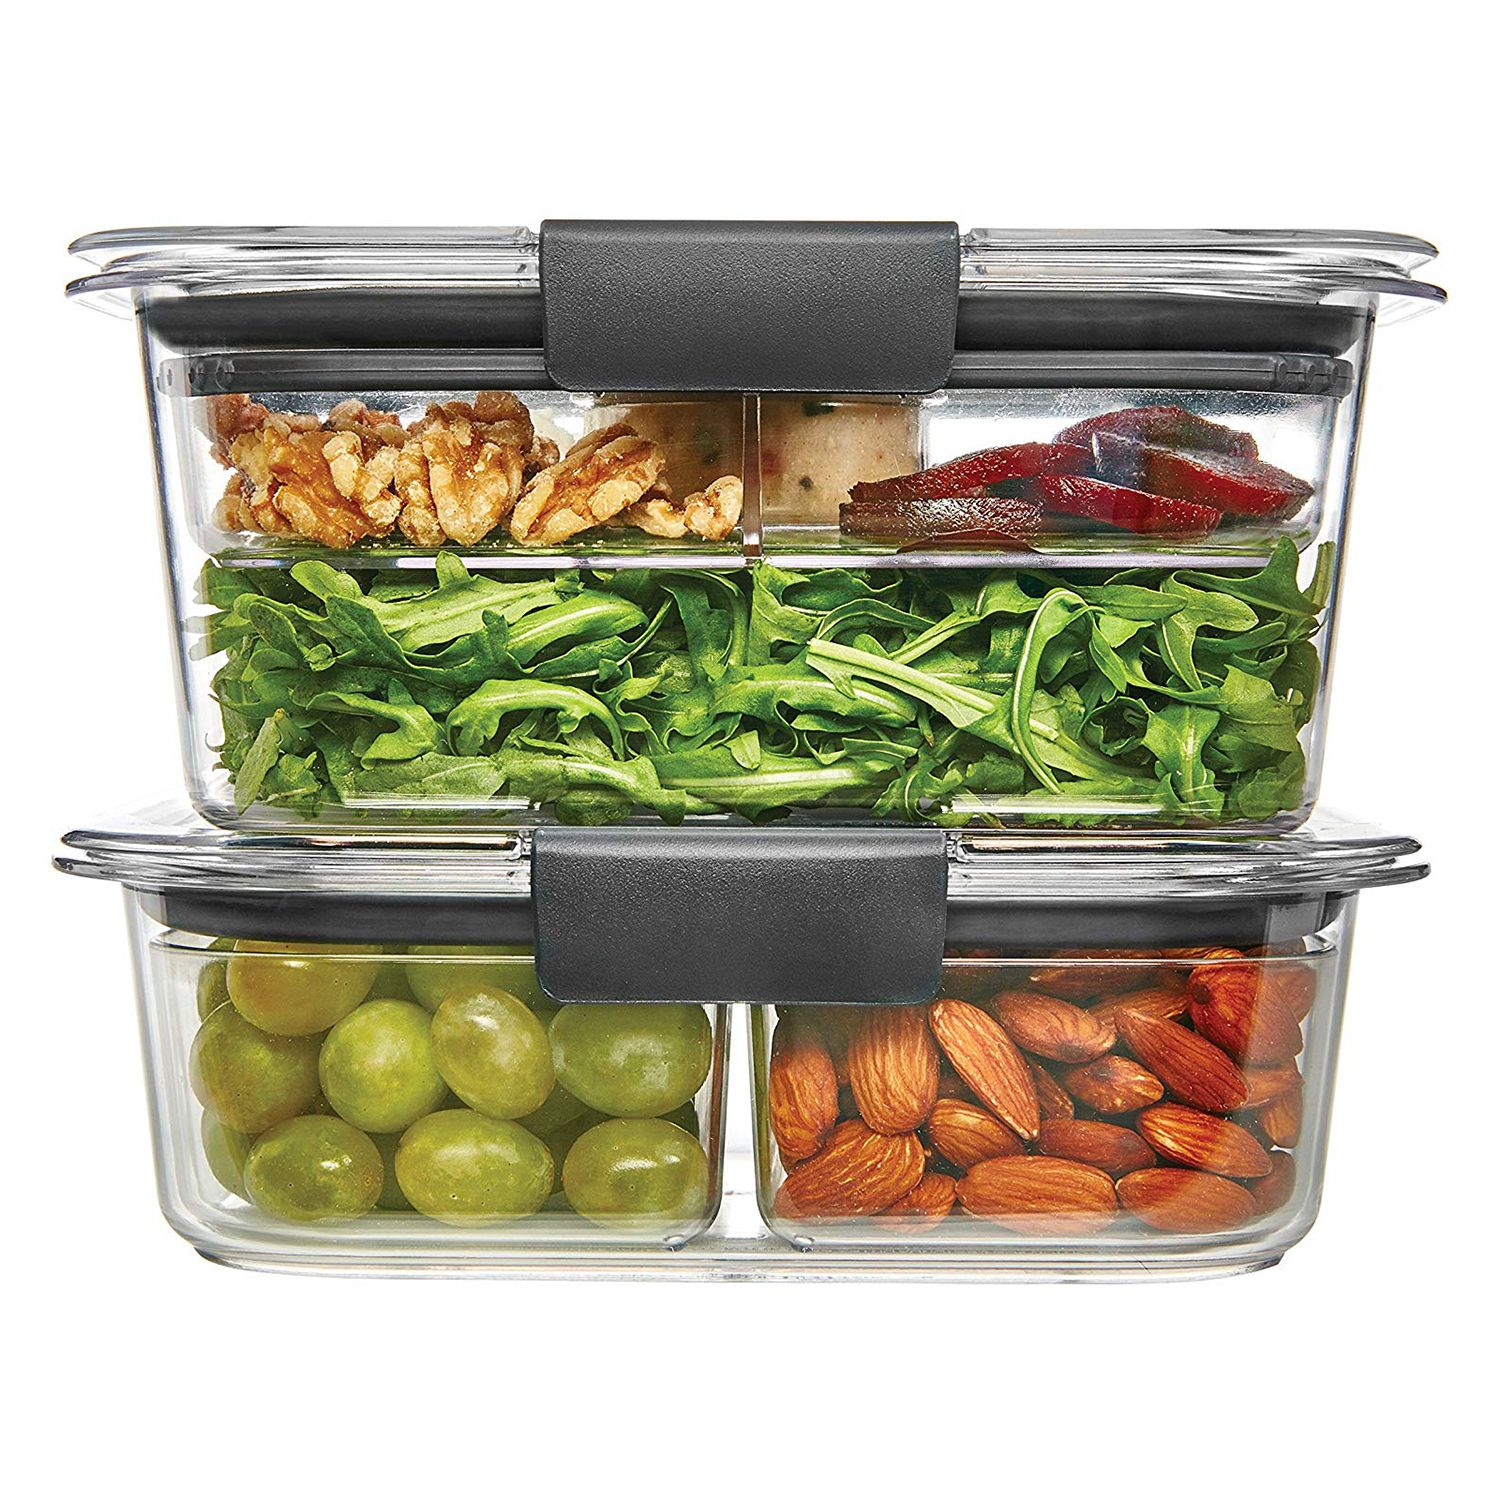 Rubbermaid Brilliance Food Storage Container Nine-Piece Combo Kit